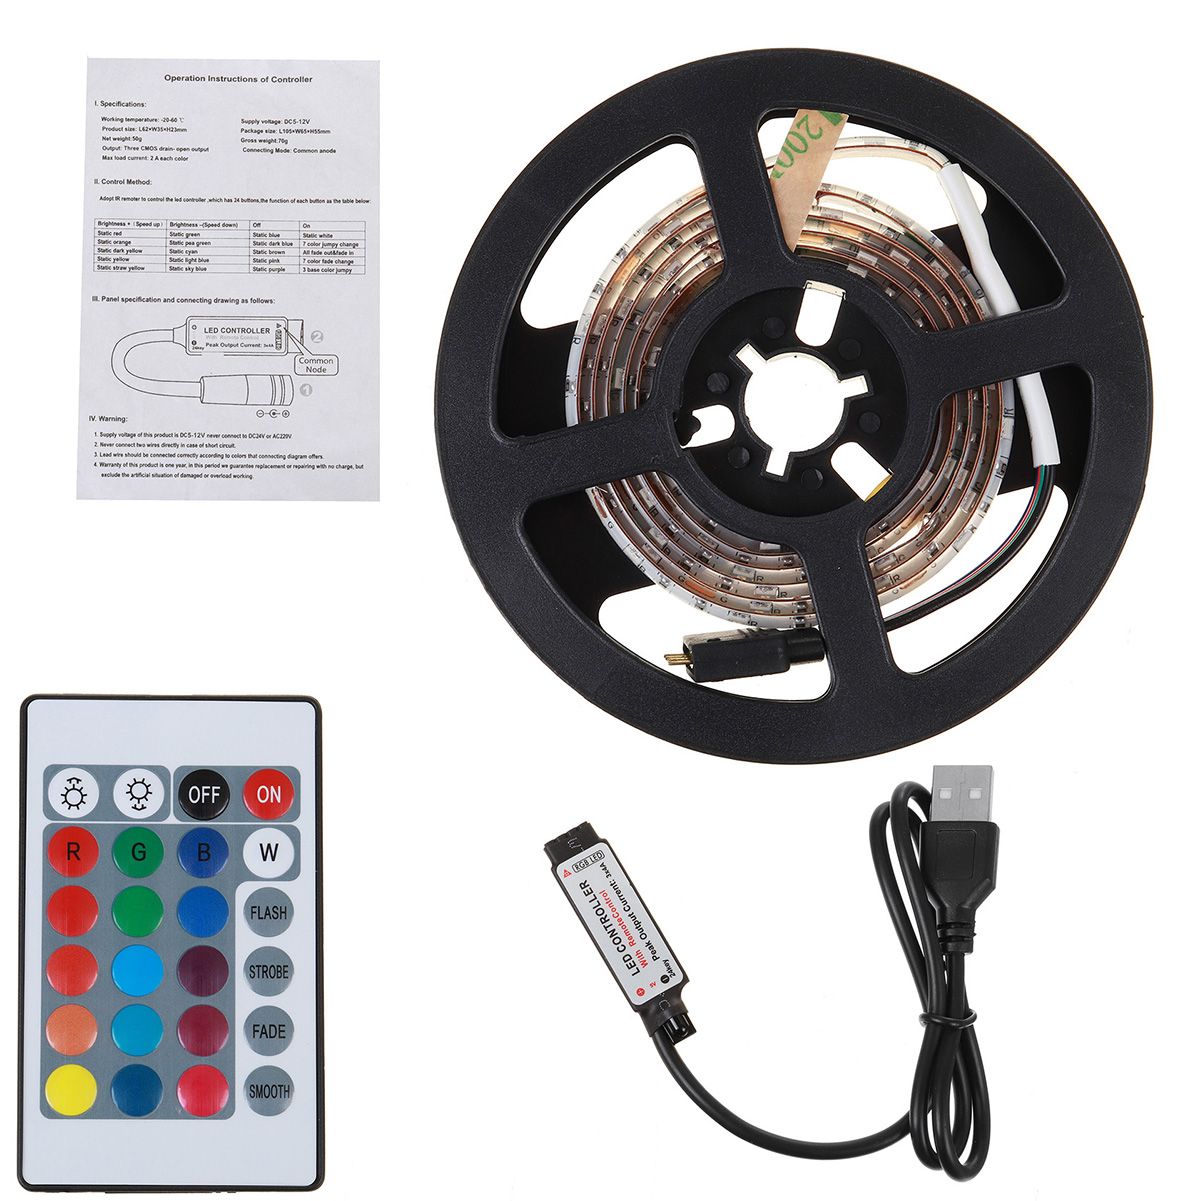 05m1m2m3m-RGB-LED-Lamp-2835-SMD-Light-Bar-Hotel-TV-Backlight-String-Light-Waterproof-with-Control-Re-1712868